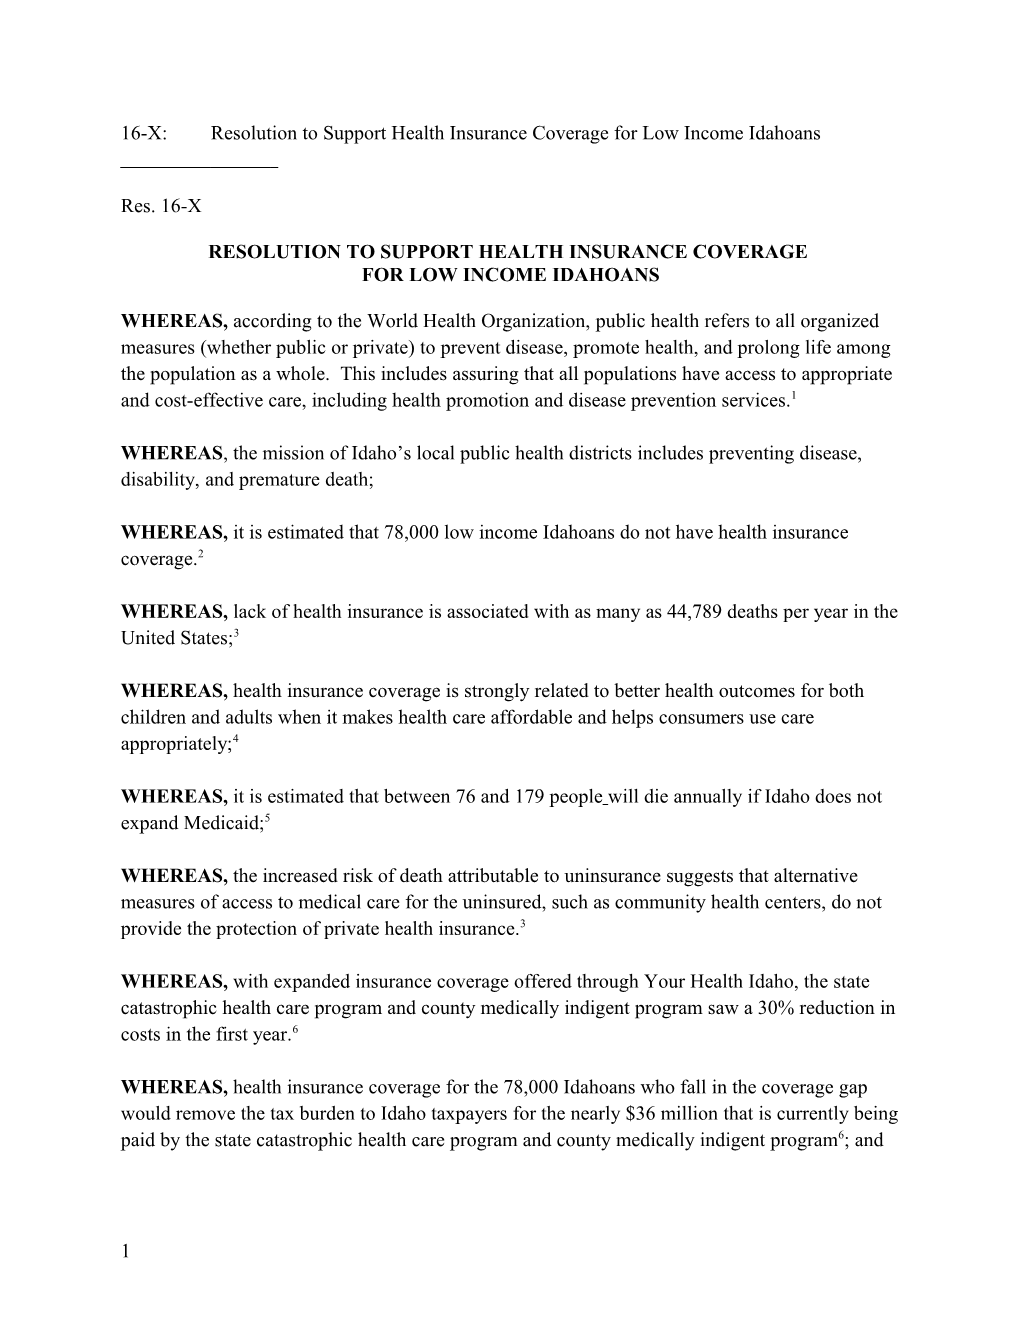 Resolution to Support Health Insurance Coverage